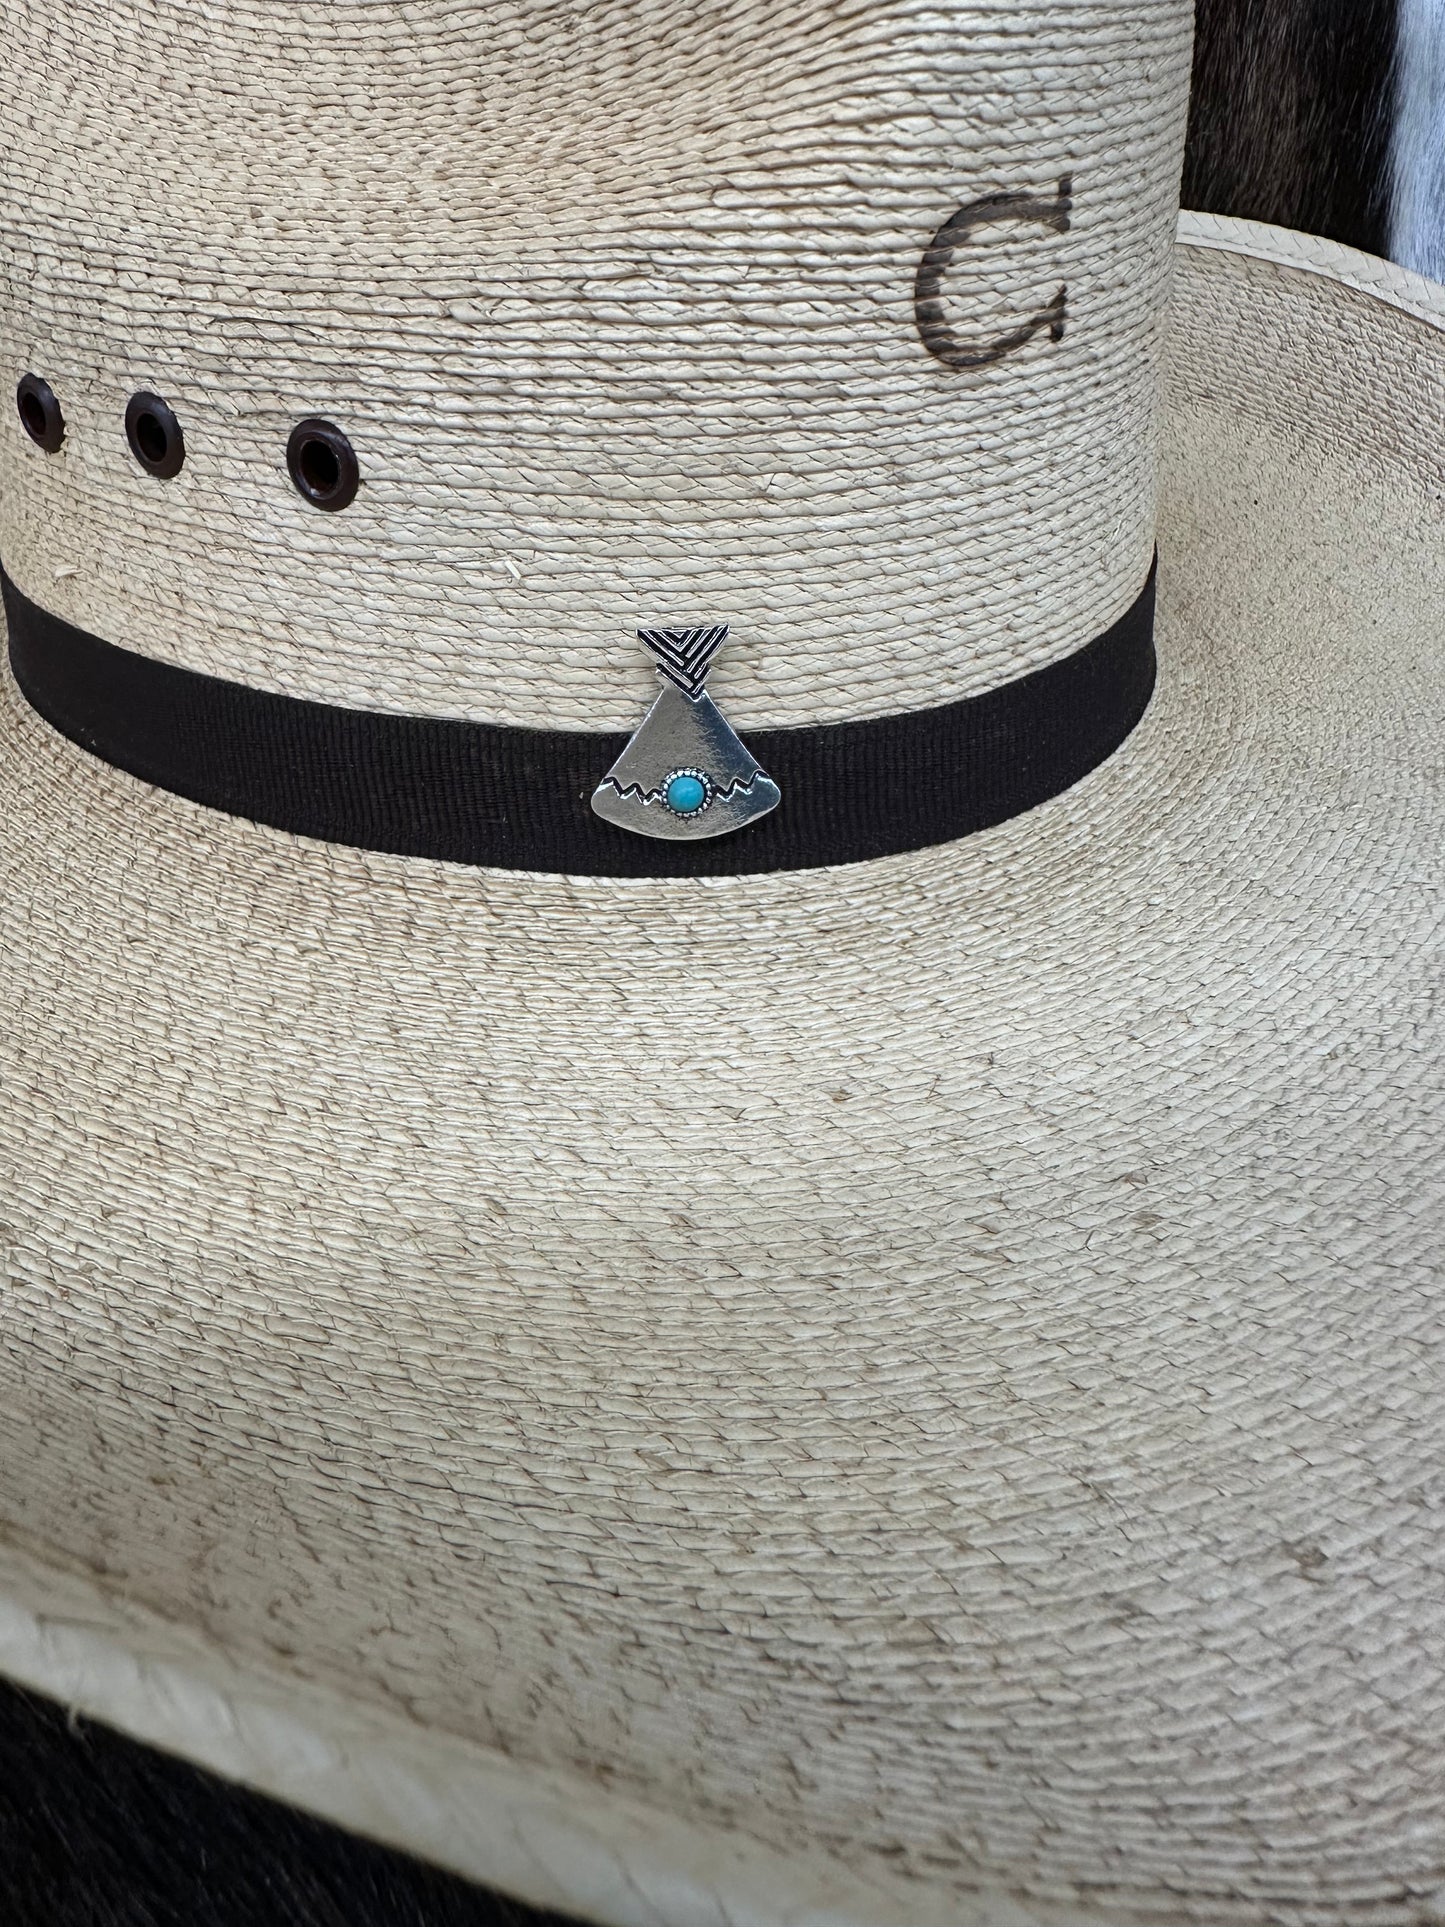 The Tipi Hat Pin